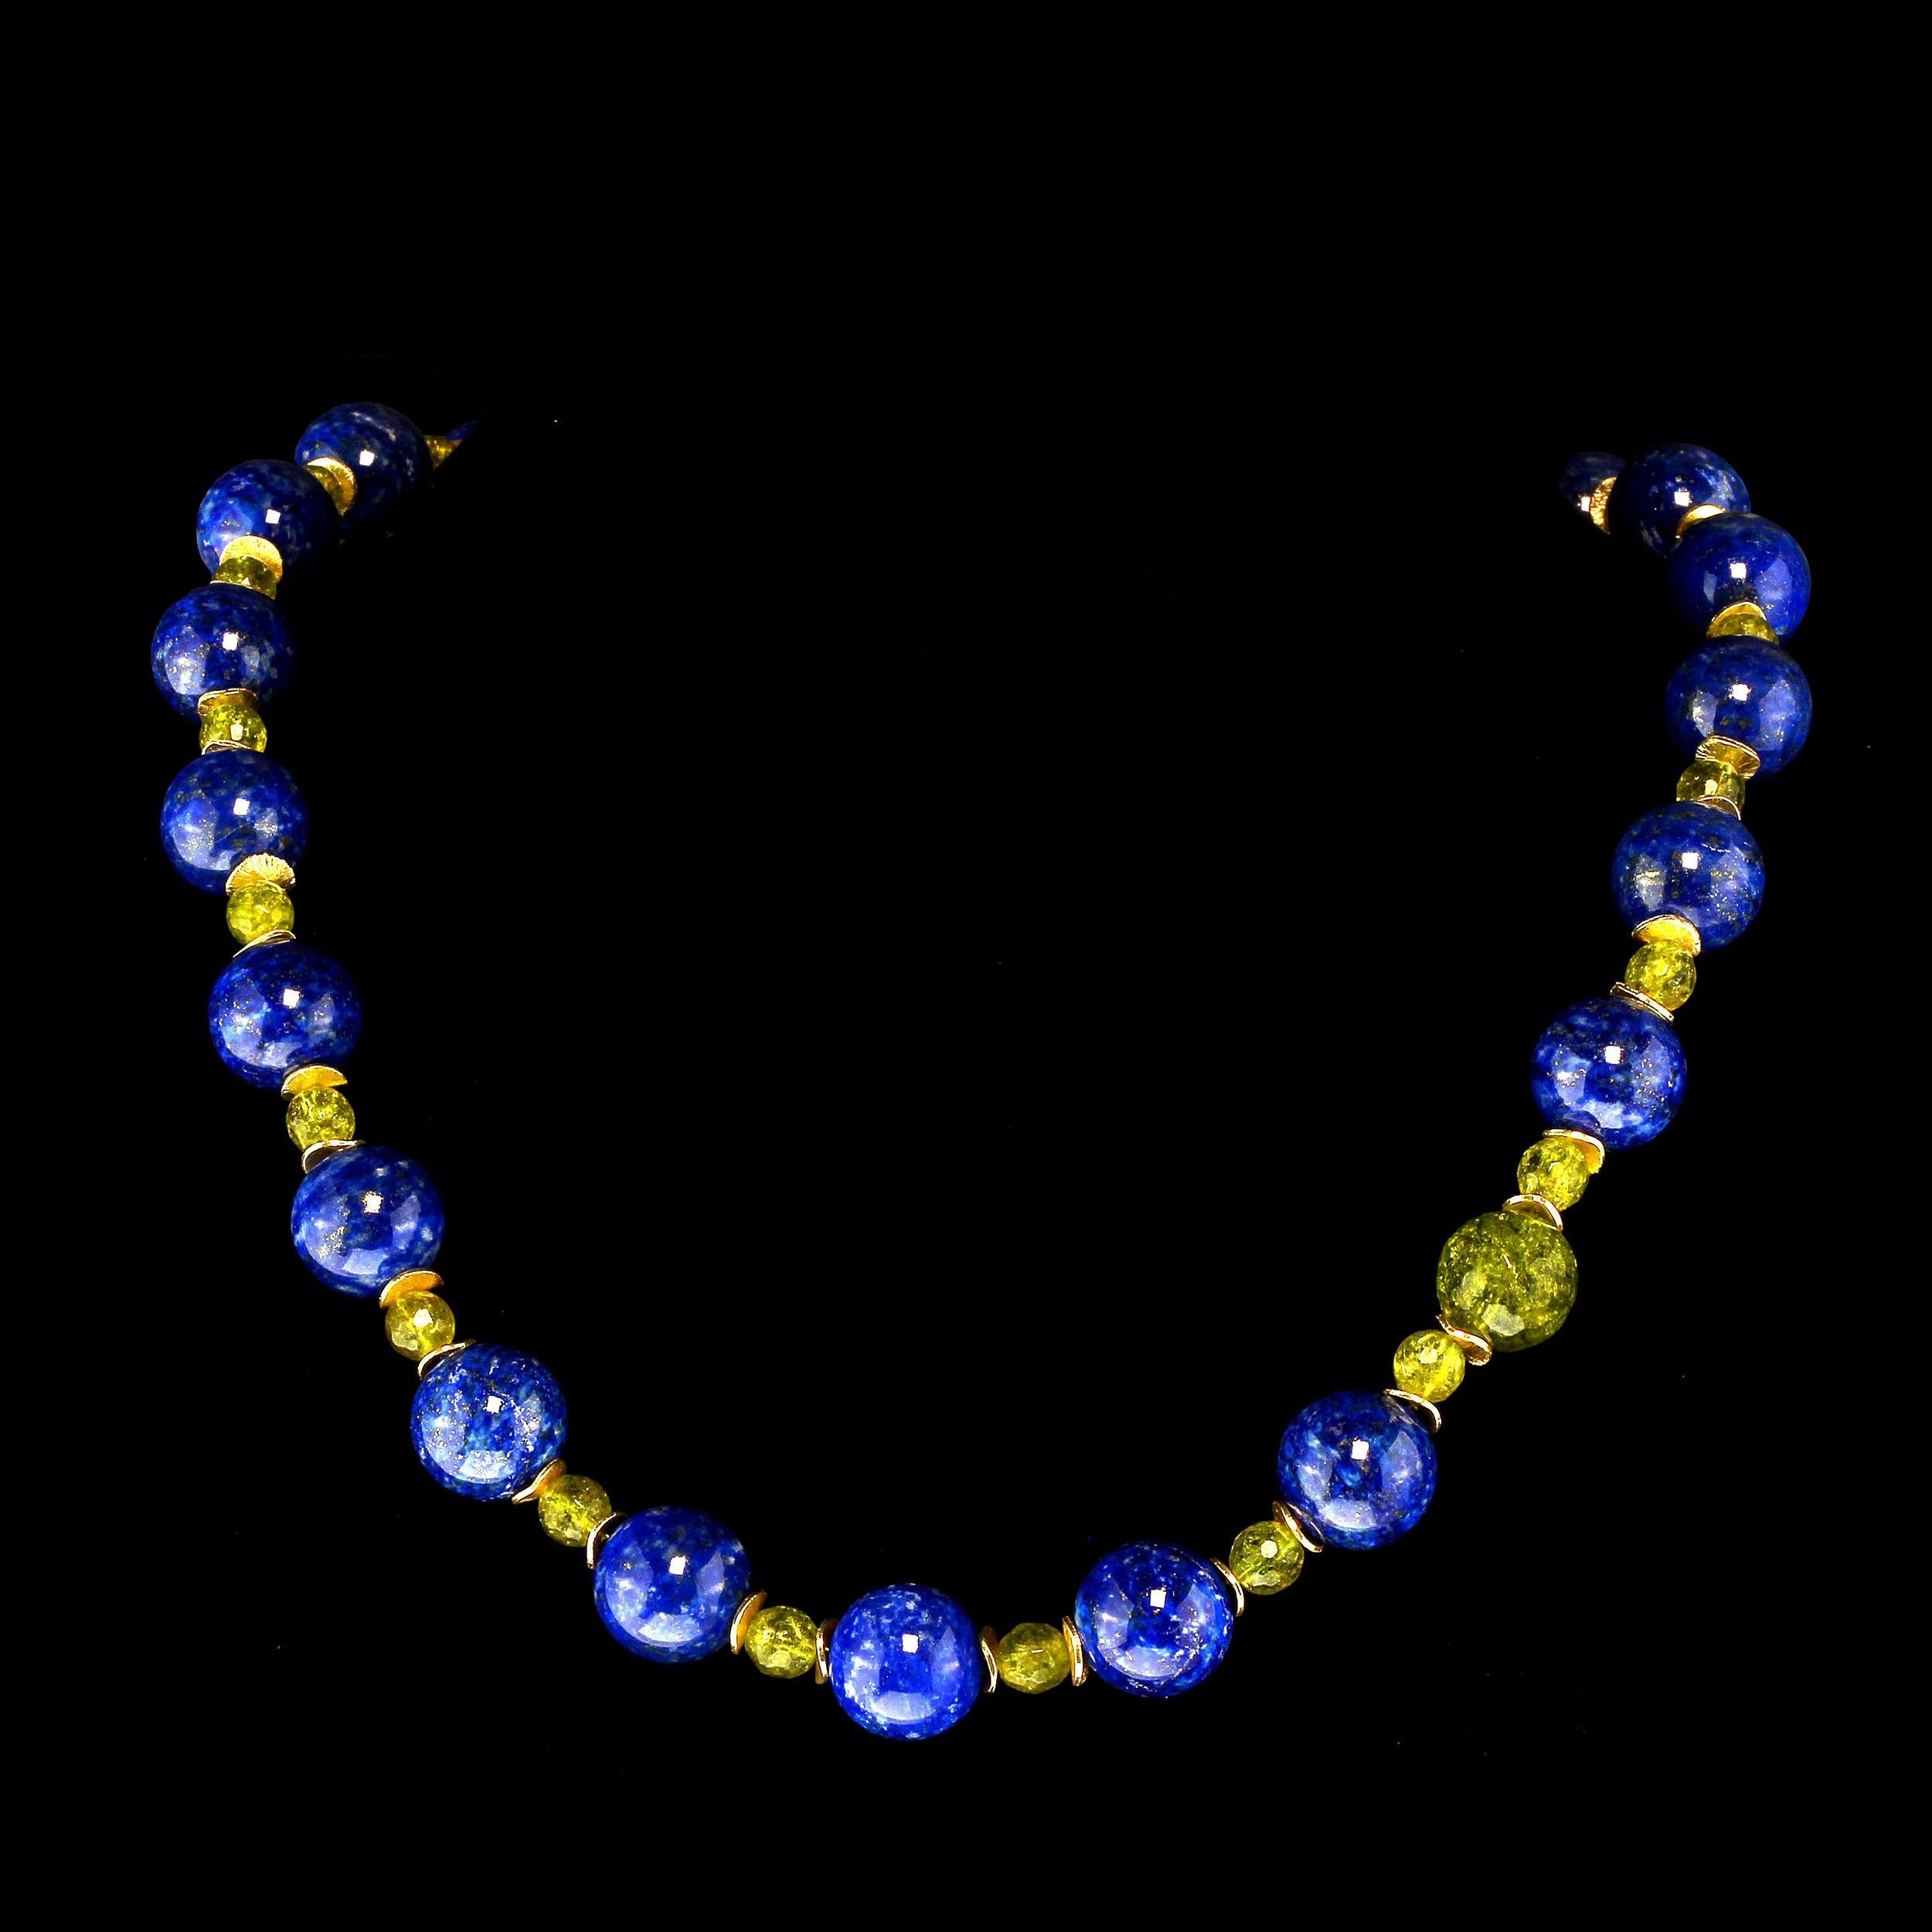 23 Inch Lapis Lazuli and Peridot necklace that will brighten your day. This lovely custom made necklace features 14 MM Lapis Lazuli and 8 MM Peridot. Lapis is one of the oldest opaque gemstones in history.  More than 6,500 years.  The blue and green